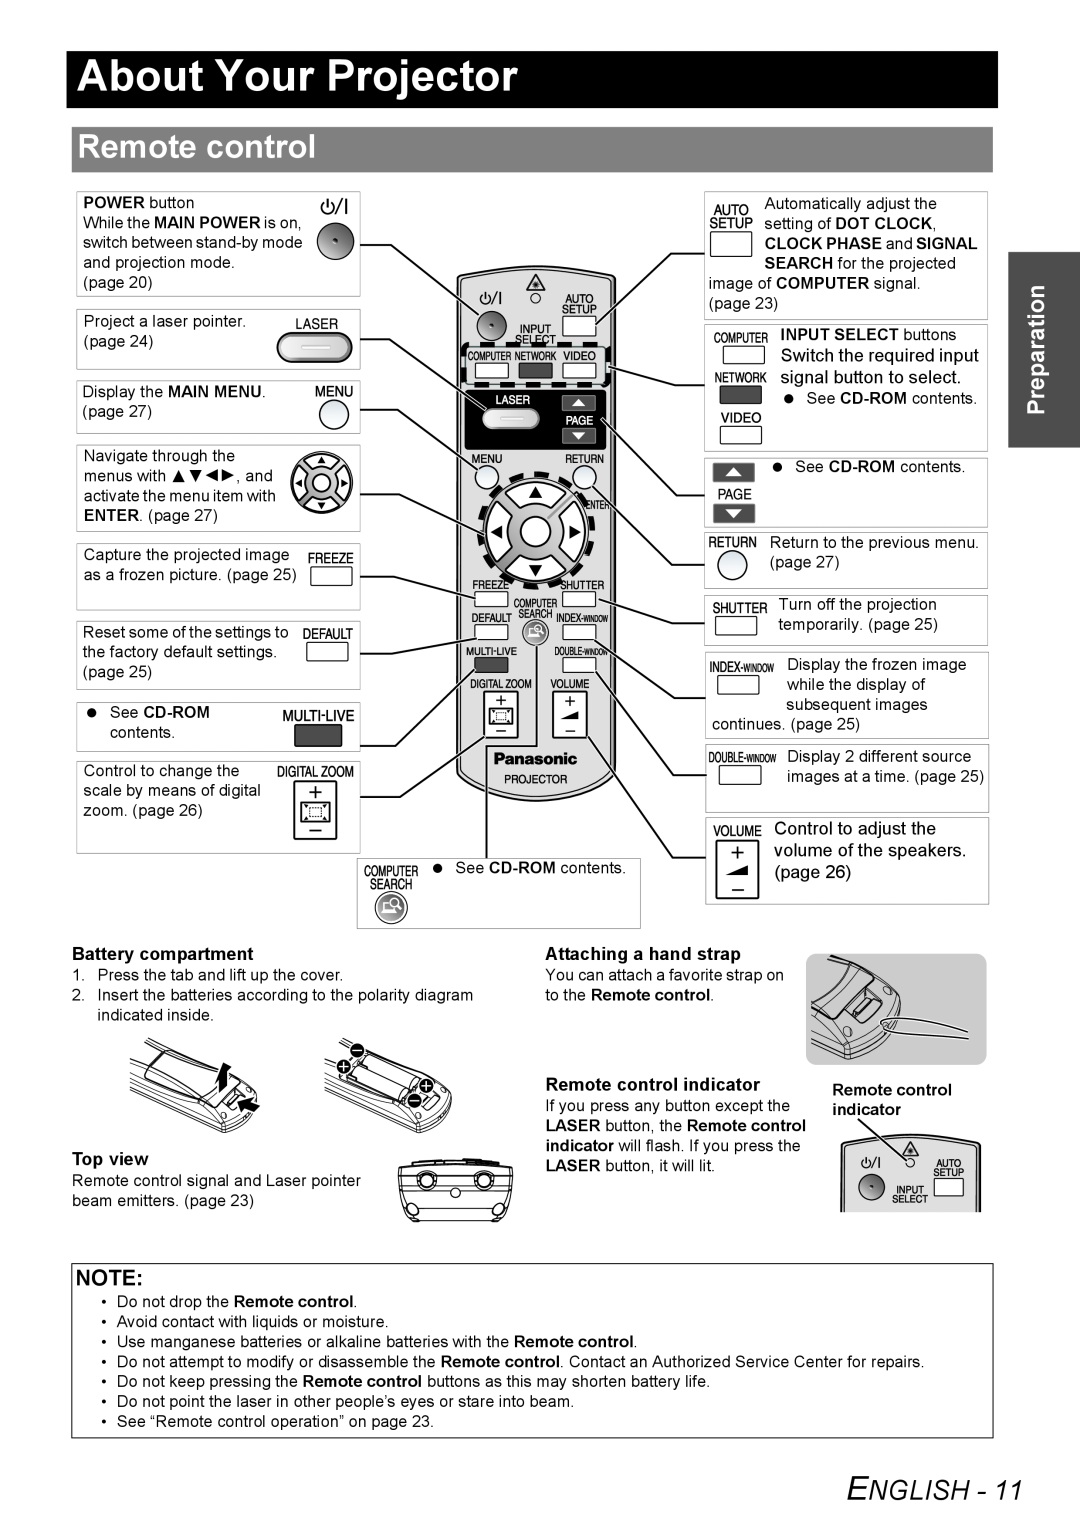 Panasonic PT-FW100NTU manual About Your Projector, Remote control, English, Preparation 